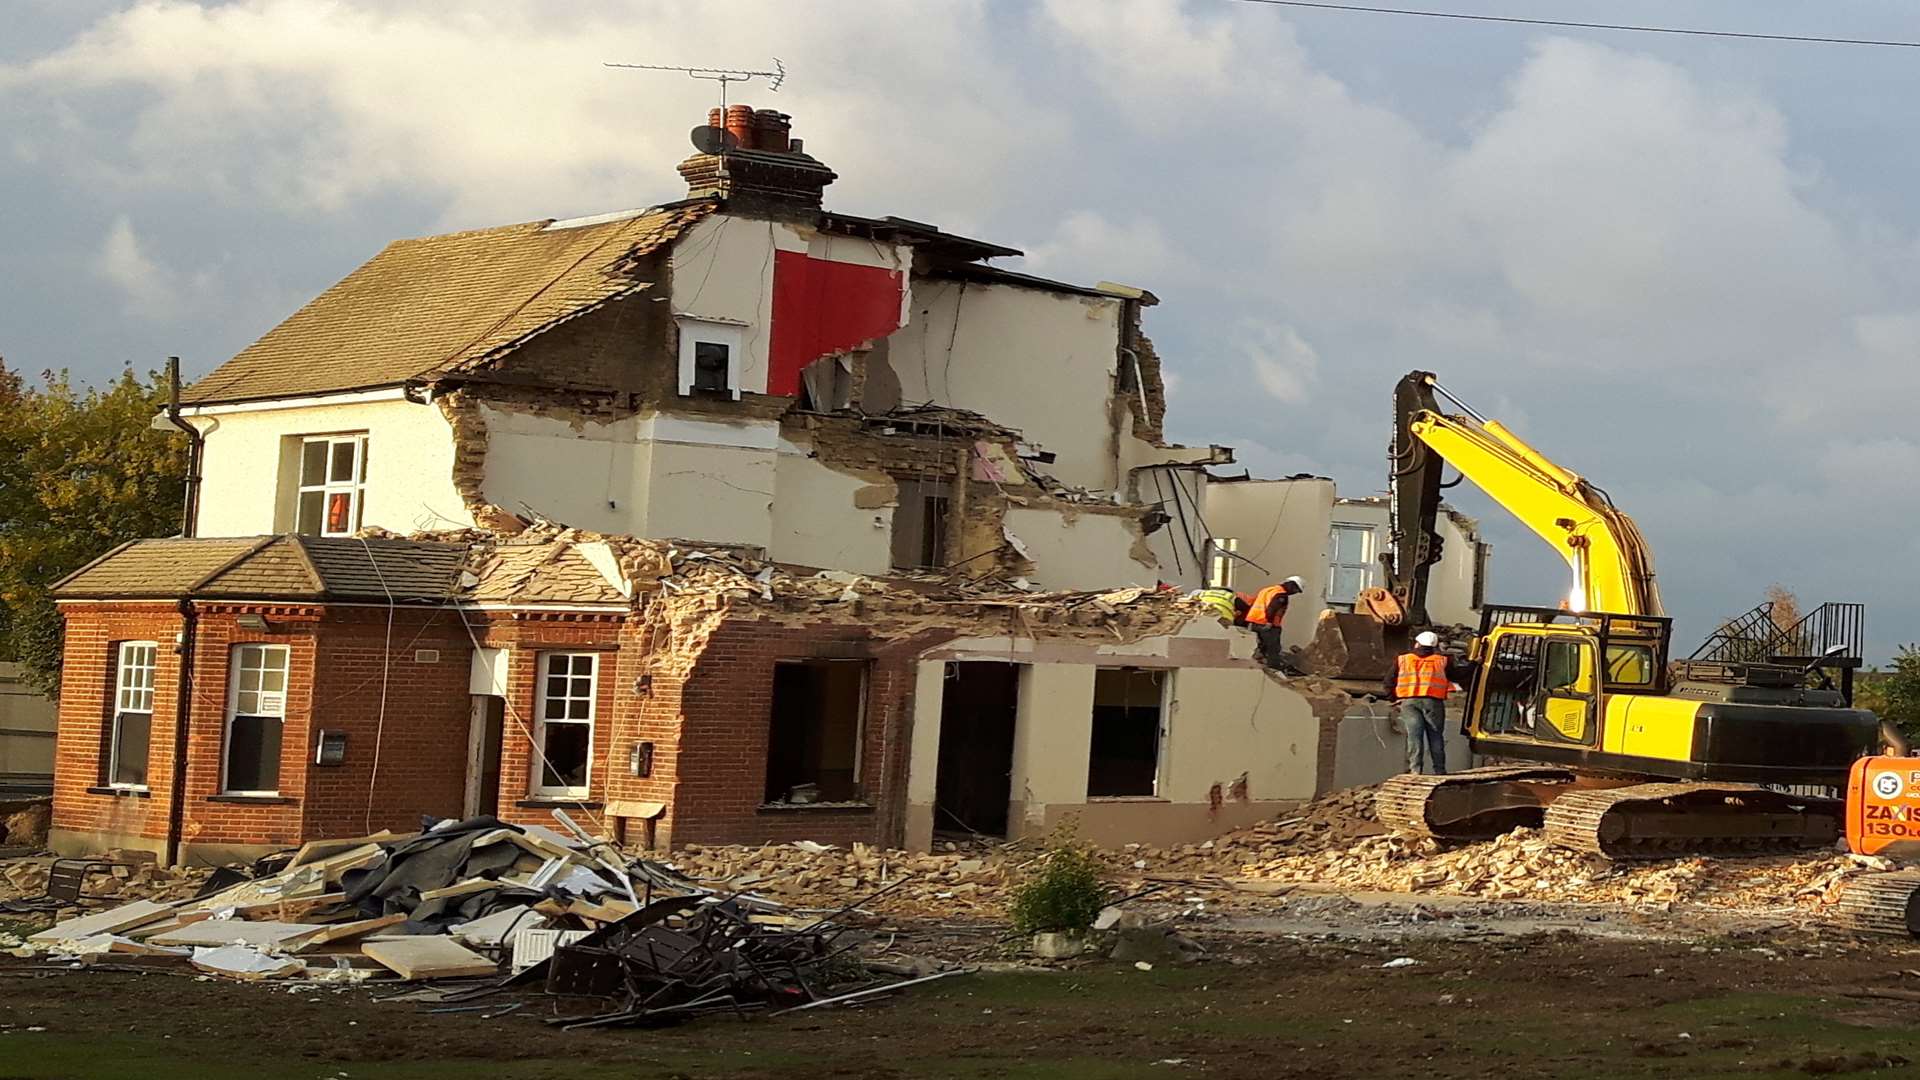 Battle of Britain pub being demolished in Gravesend without permission